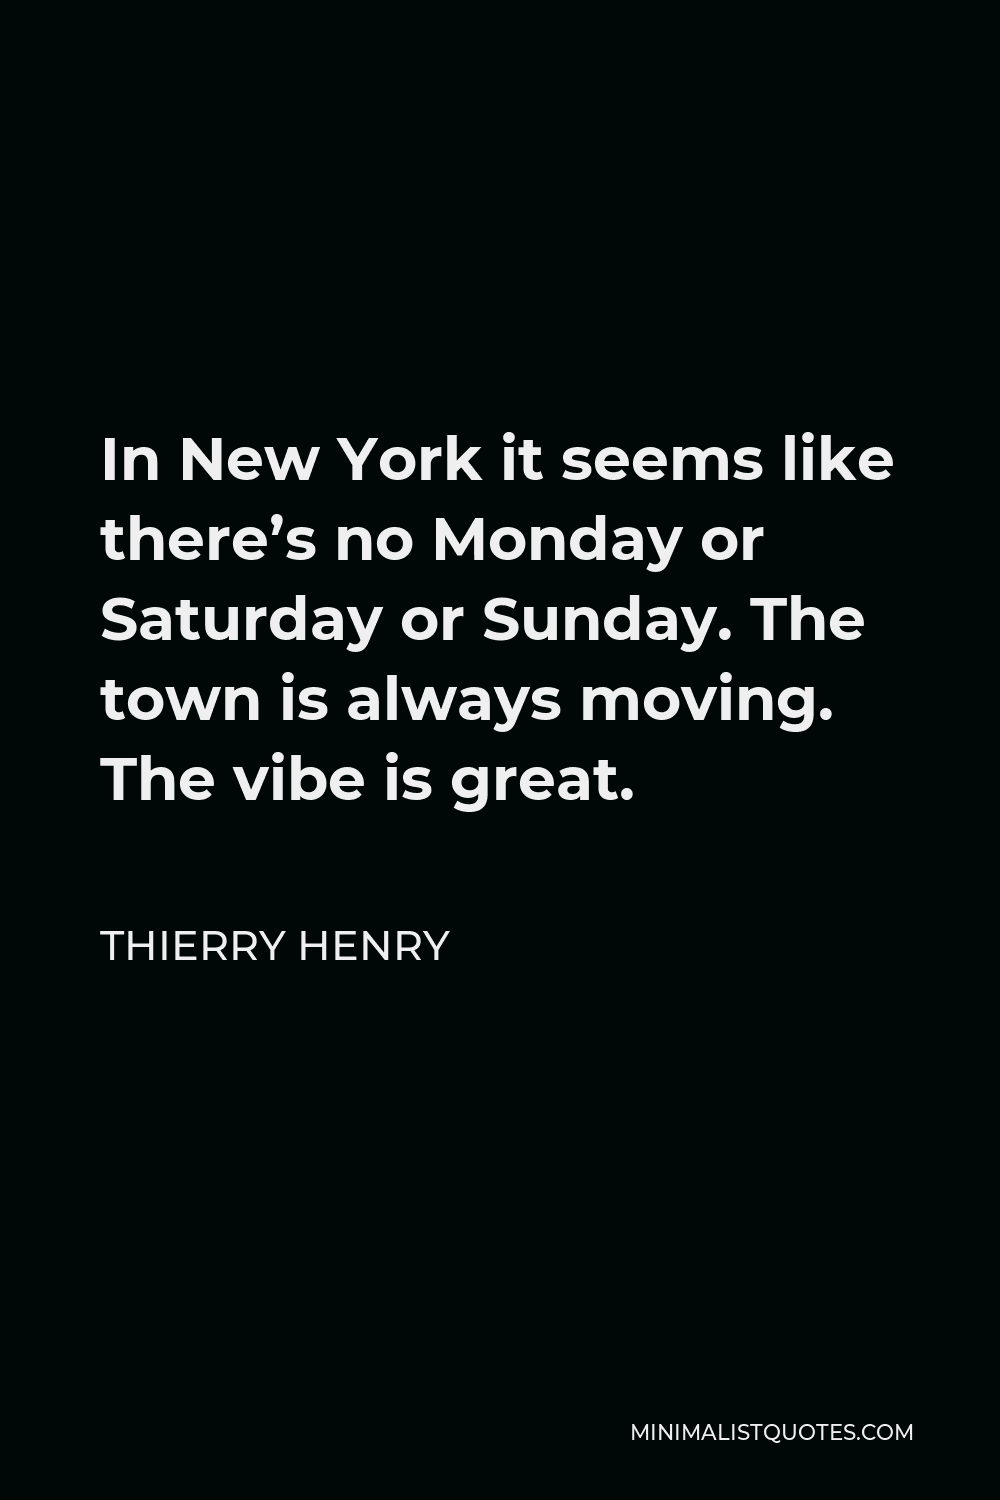 Thierry Henry Quote - In New York it seems like there’s no Monday or Saturday or Sunday. The town is always moving. The vibe is great.